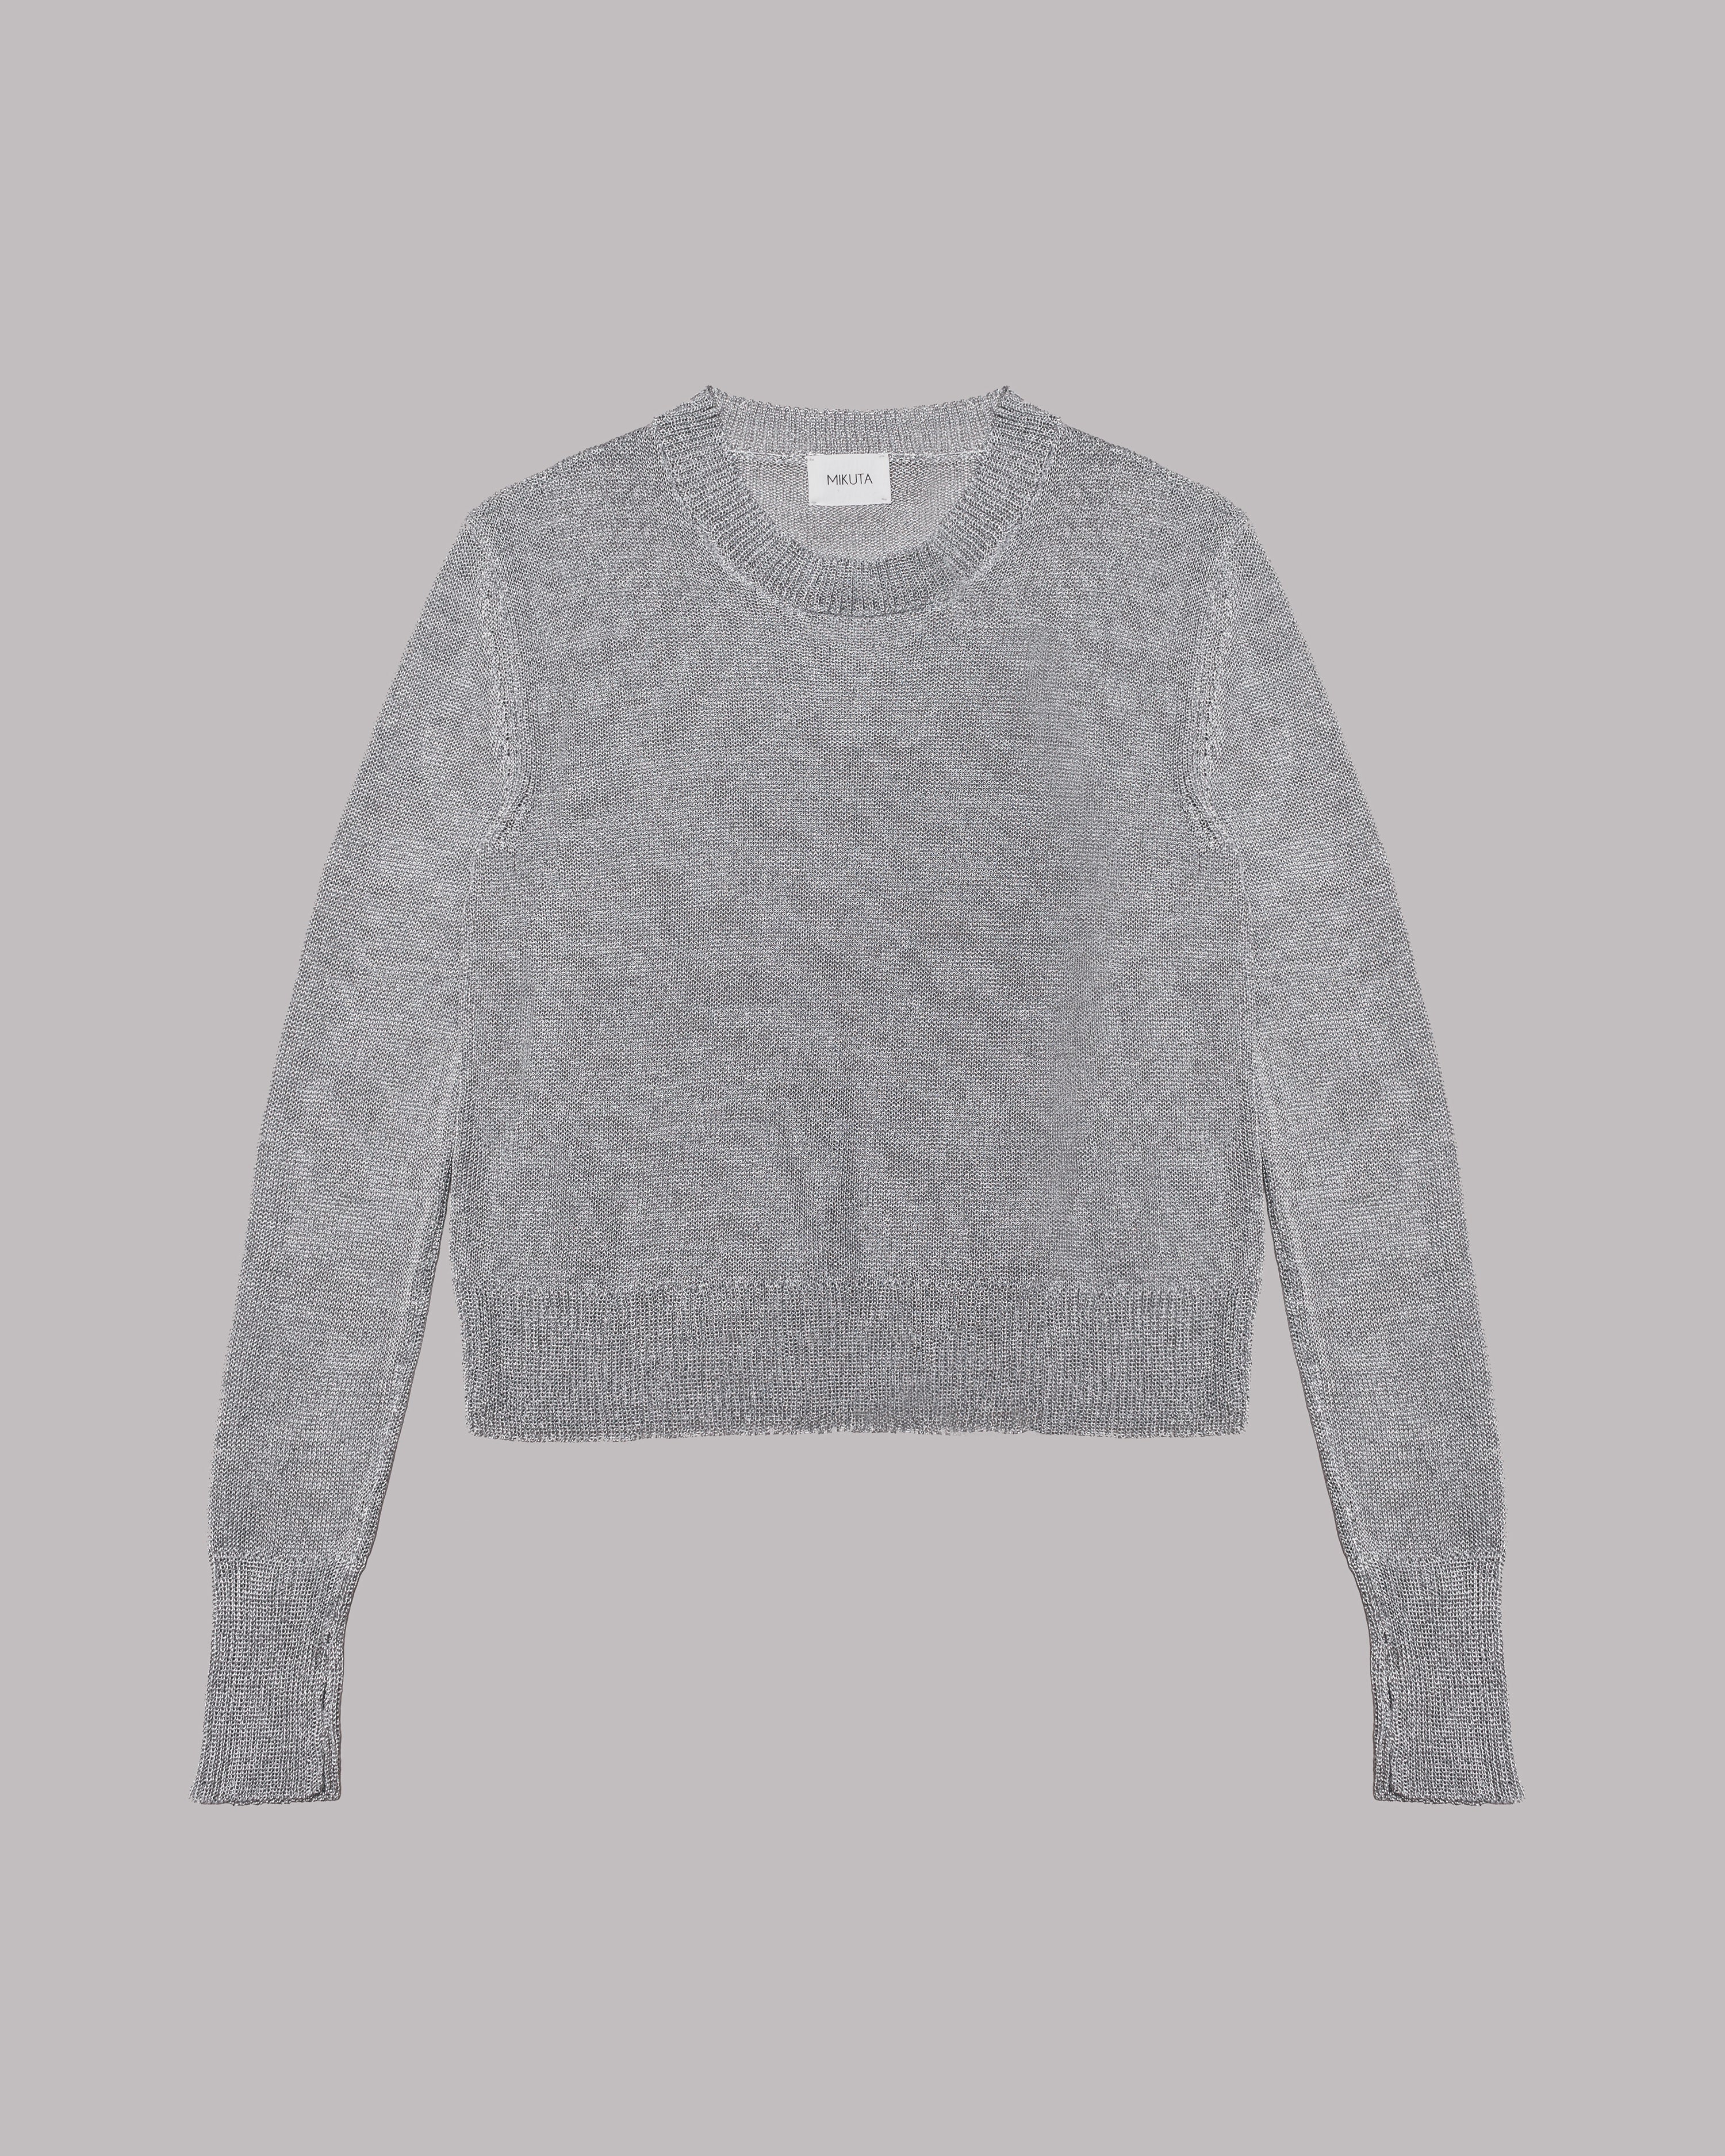 The Silver Metallic Knitted Sweater